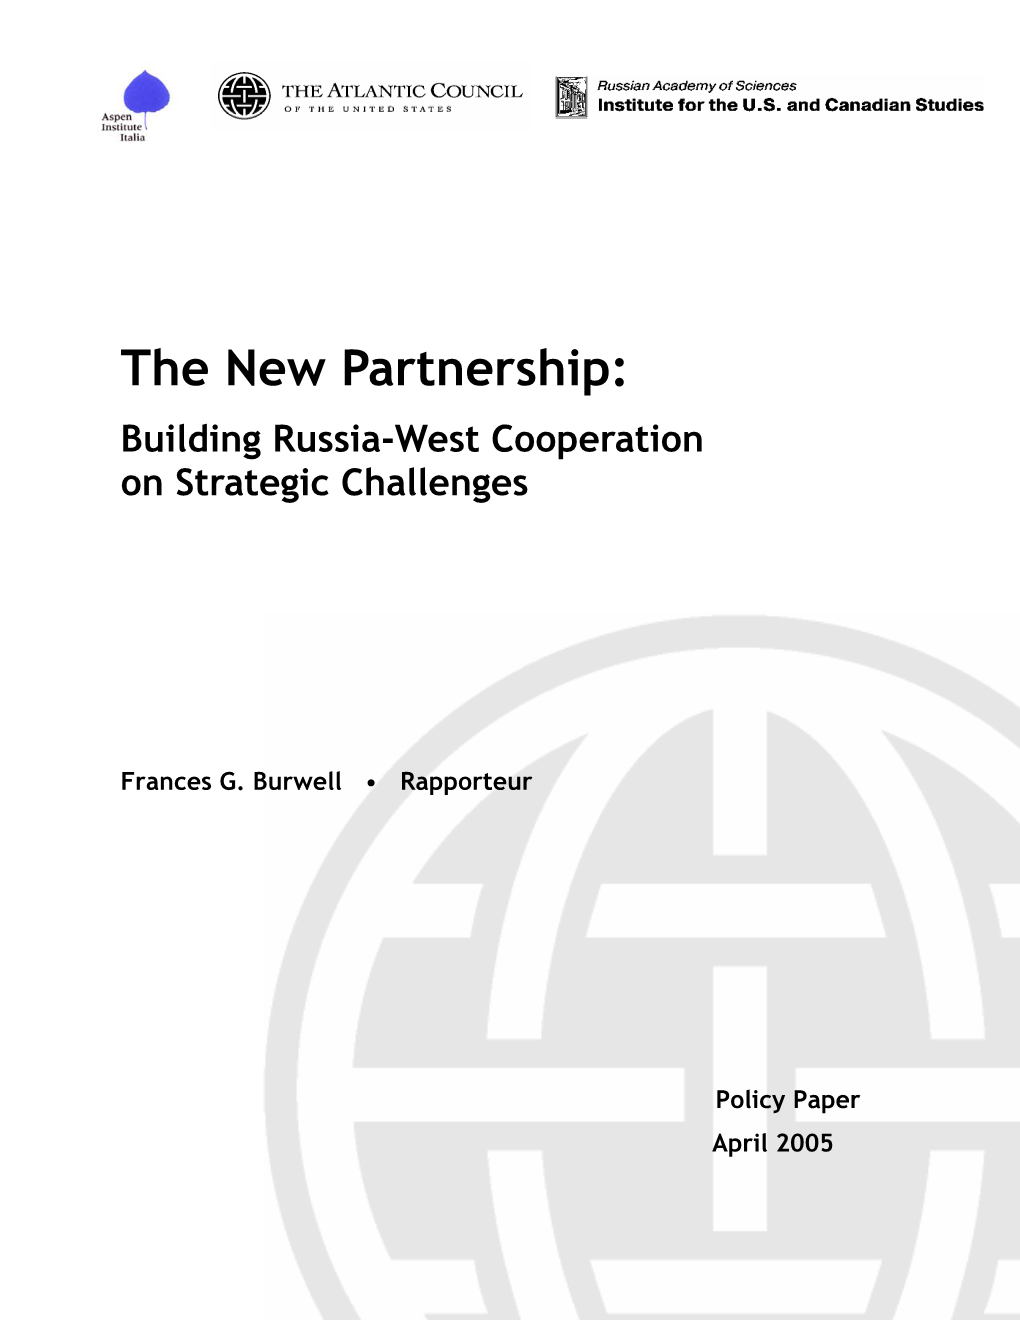 The New Partnership: Building Russia-West Cooperation on Strategic Challenges